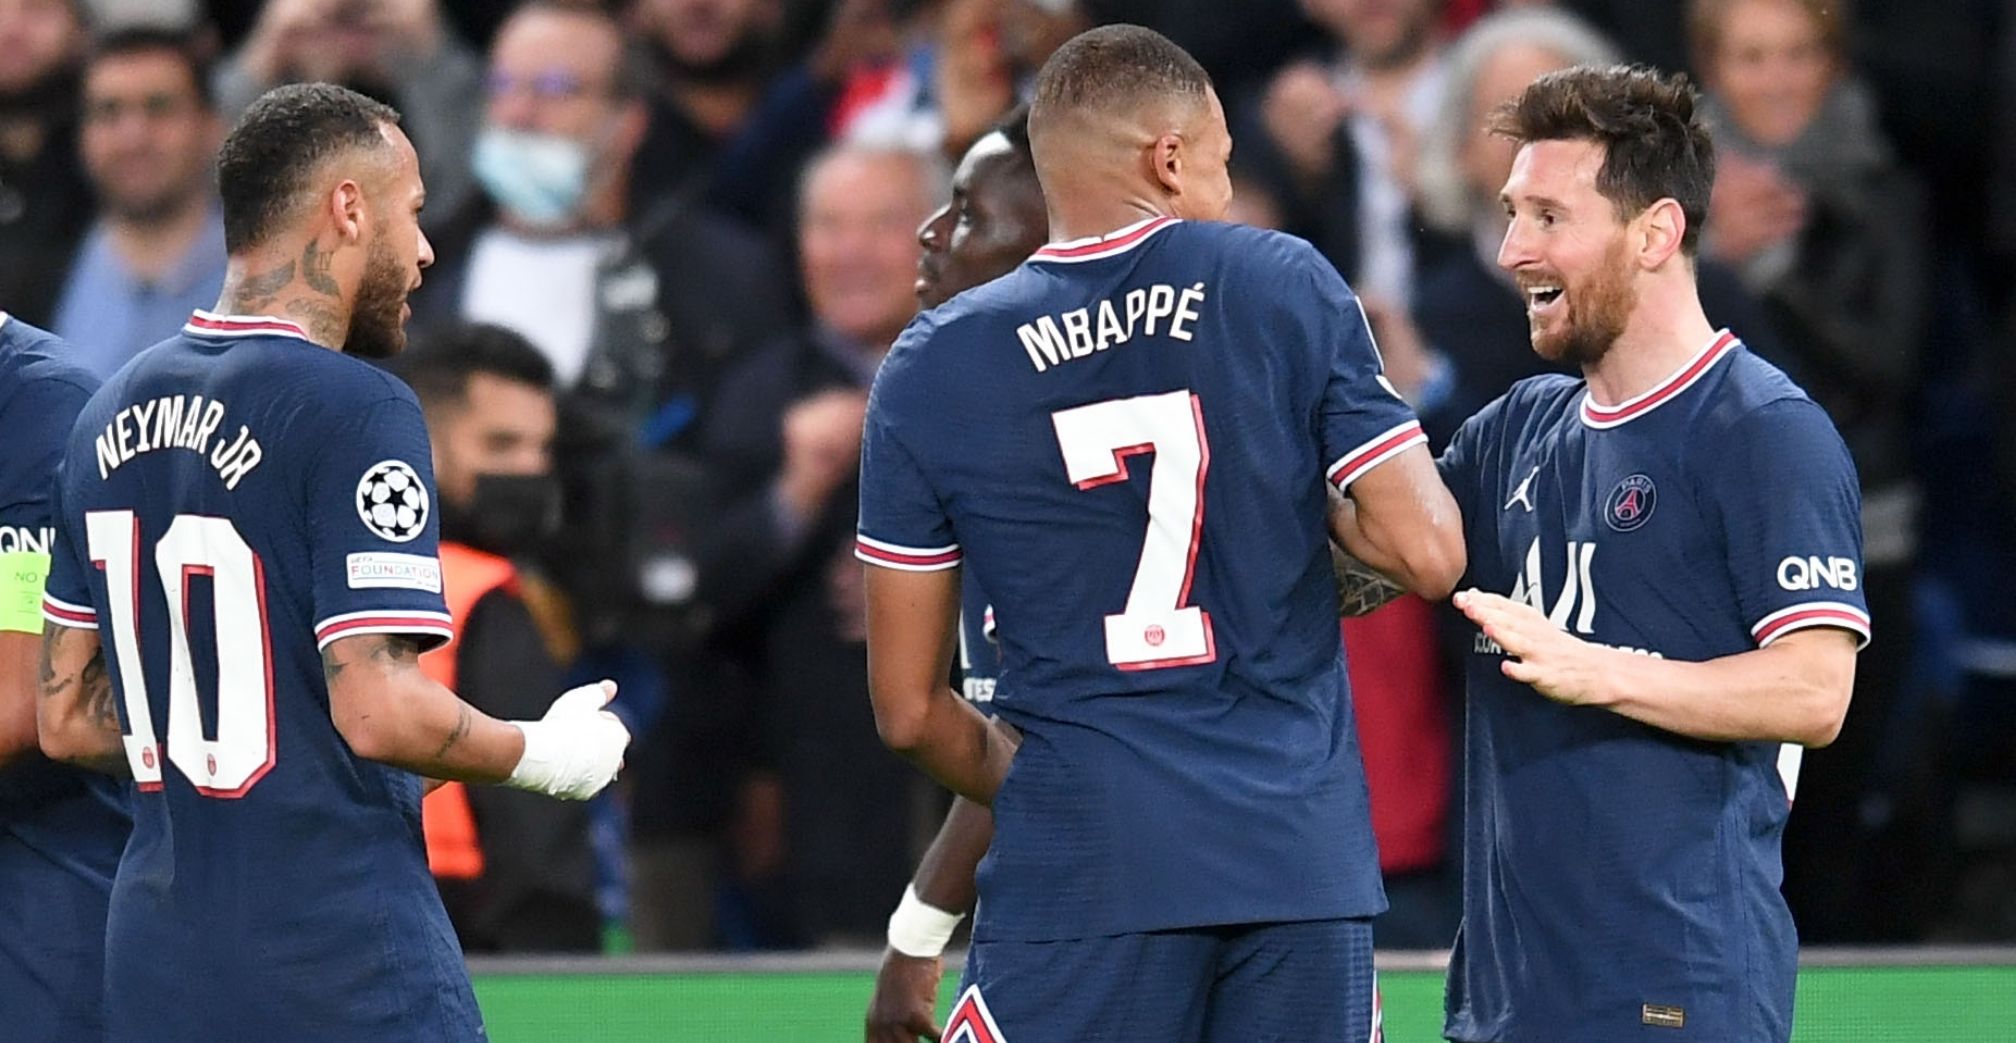 Mbappe, Messi inspire PSG to comeback 4-3 win against Lille